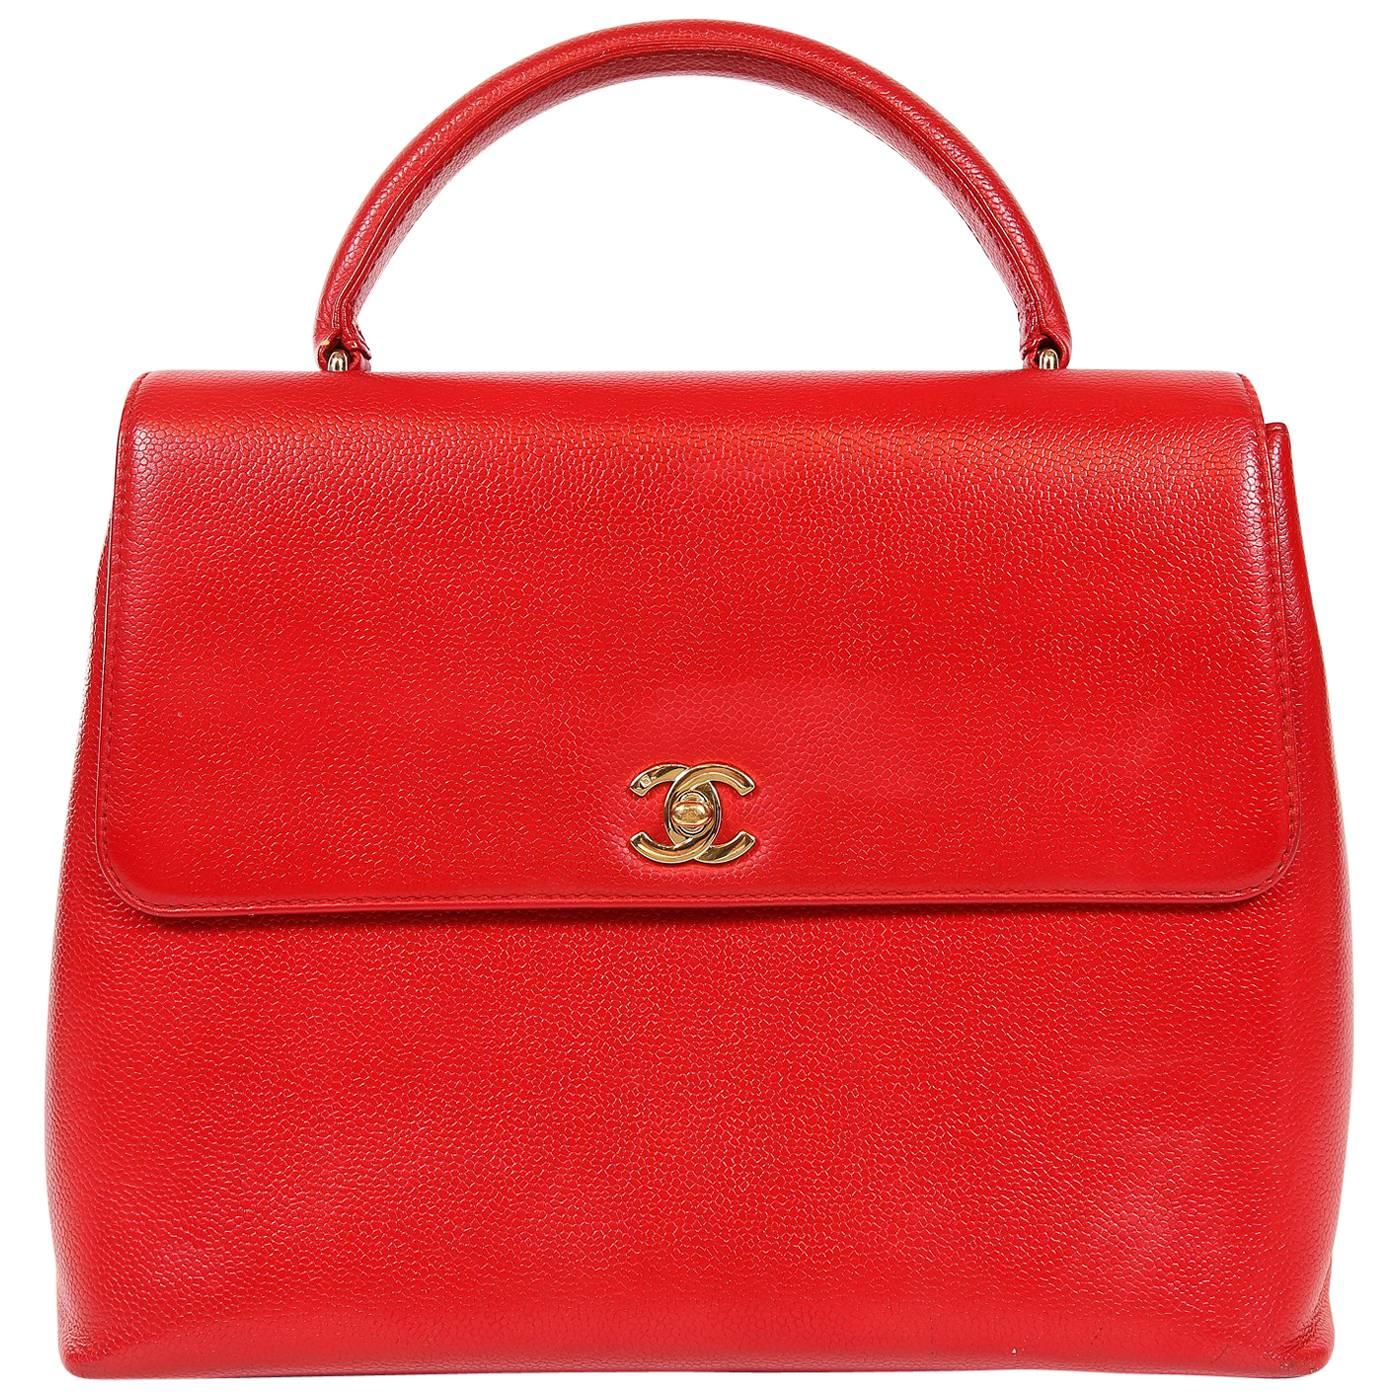 Chanel Red Caviar Leather Kelly Bag